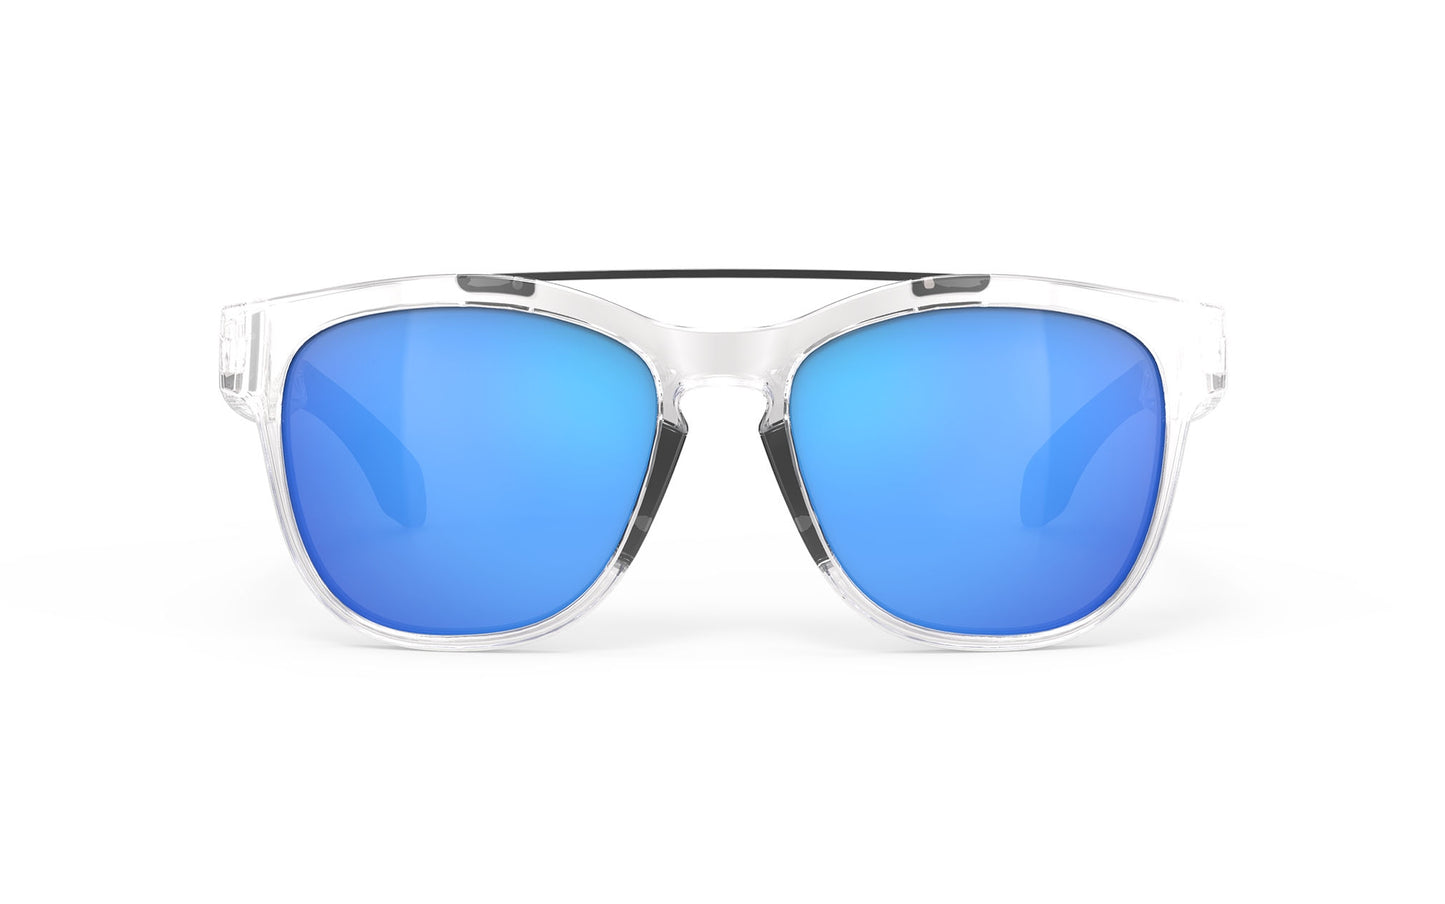 Rudy Project Spinair 59 Crystal Gloss - Multilaser Blue Sunglasses